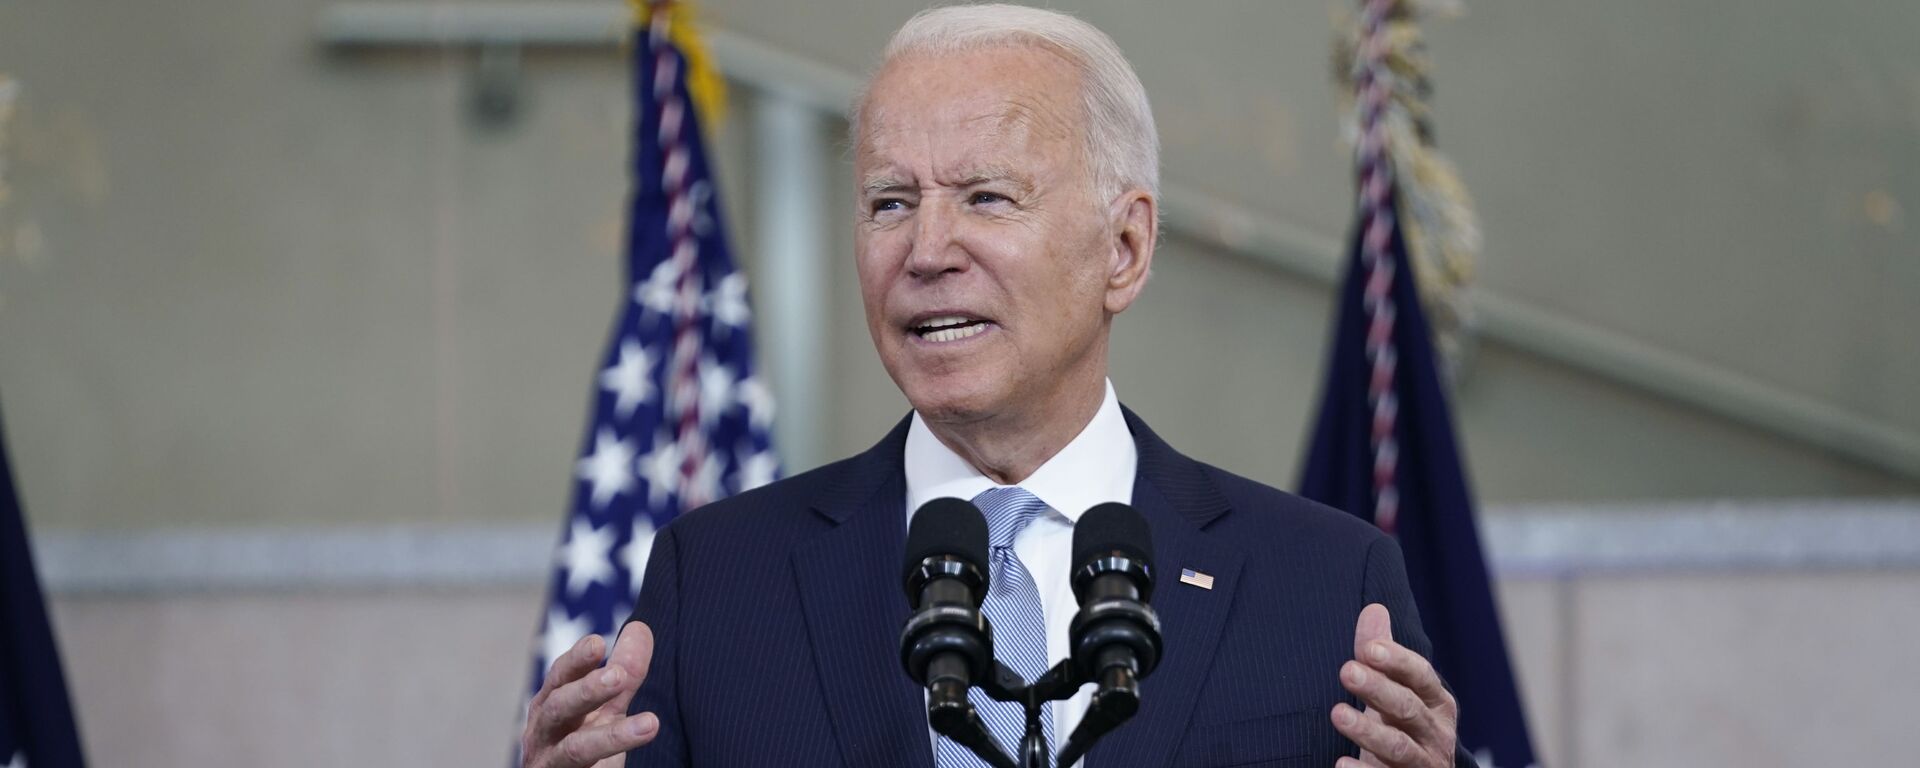 President Joe Biden delivers a speech on voting rights at the National Constitution Center, Tuesday, July 13, 2021, in Philadelphia. - Sputnik 日本, 1920, 12.08.2021